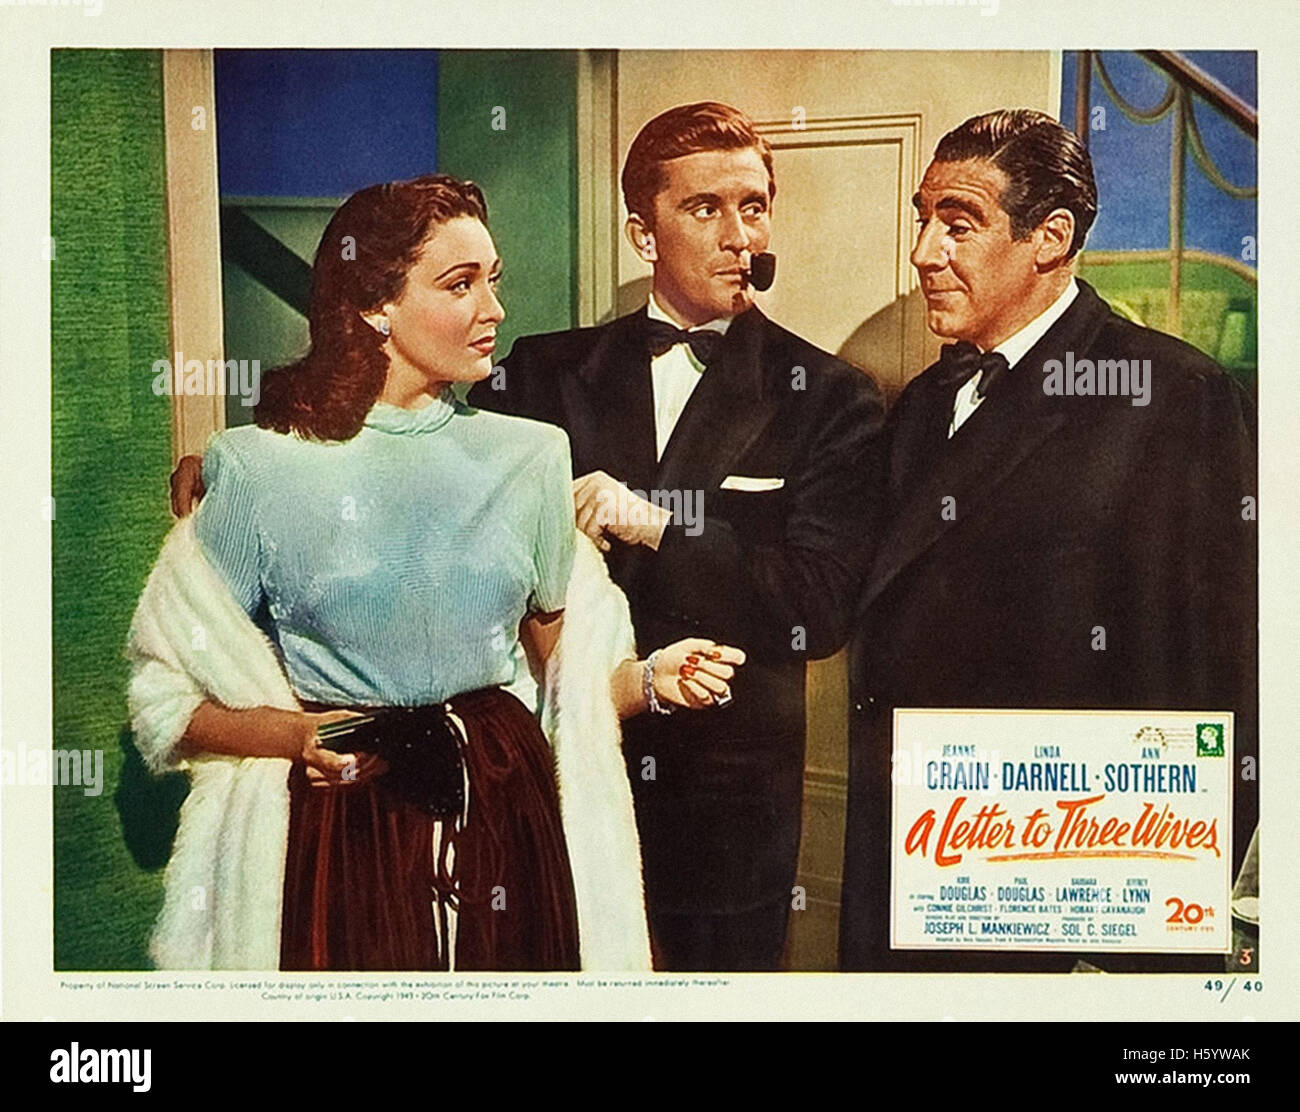 A Letter to Three Wives - Movie Poster Stock Photo - Alamy